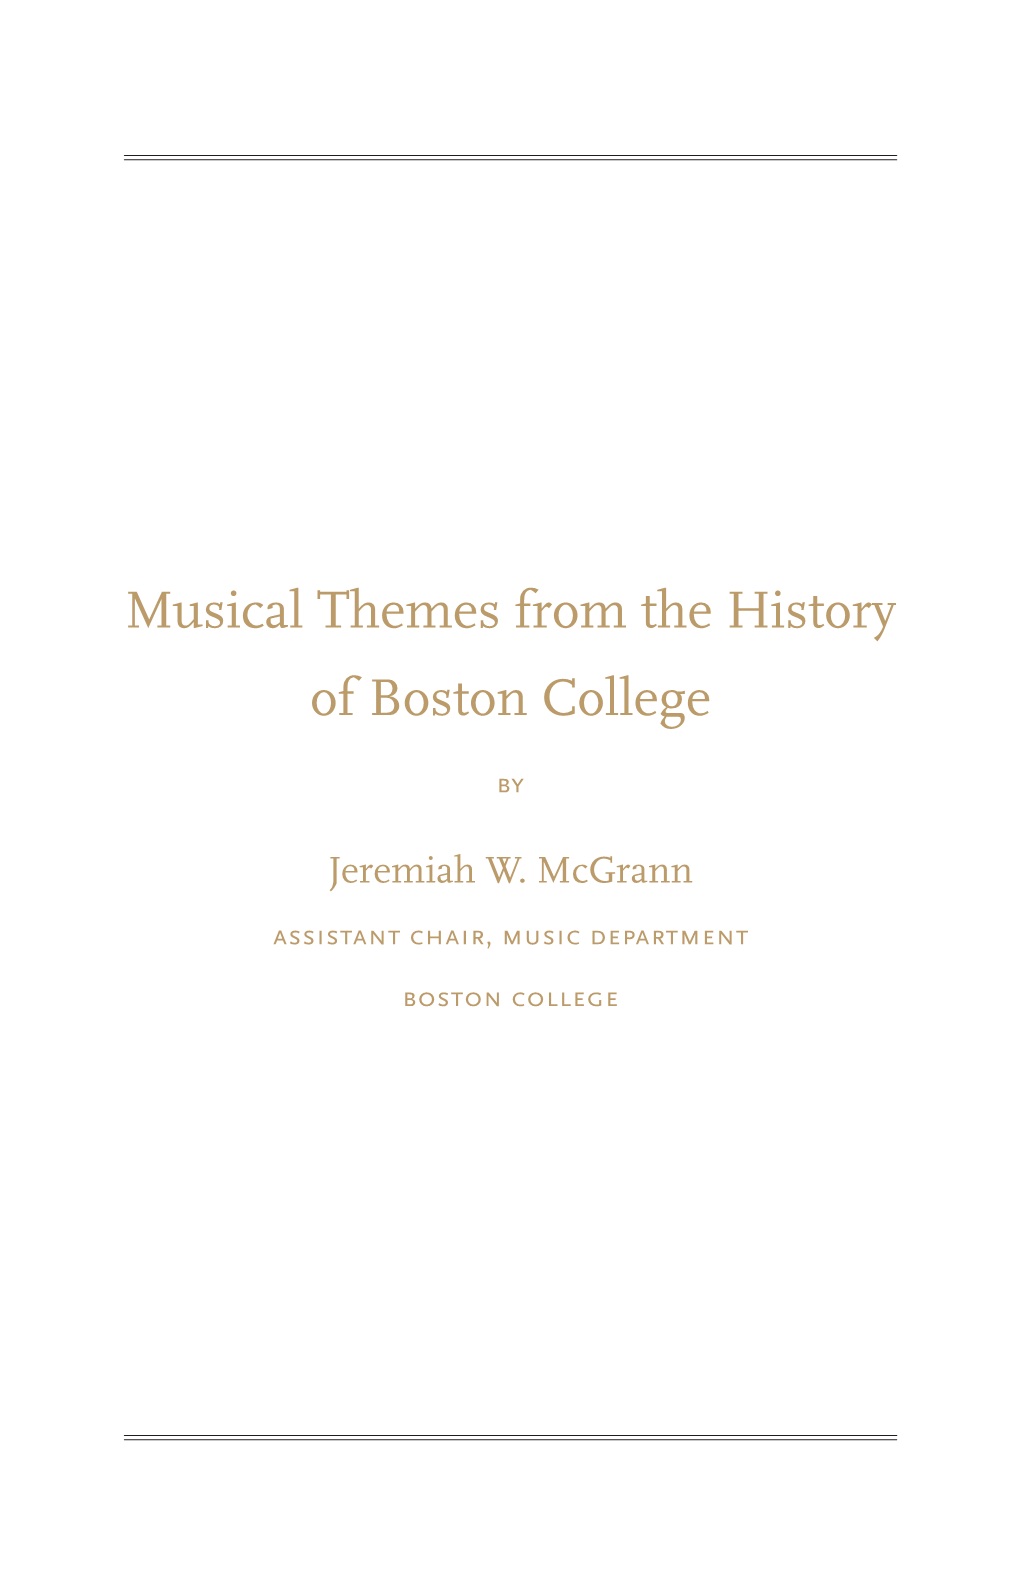 Musical Themes from the History of Boston College